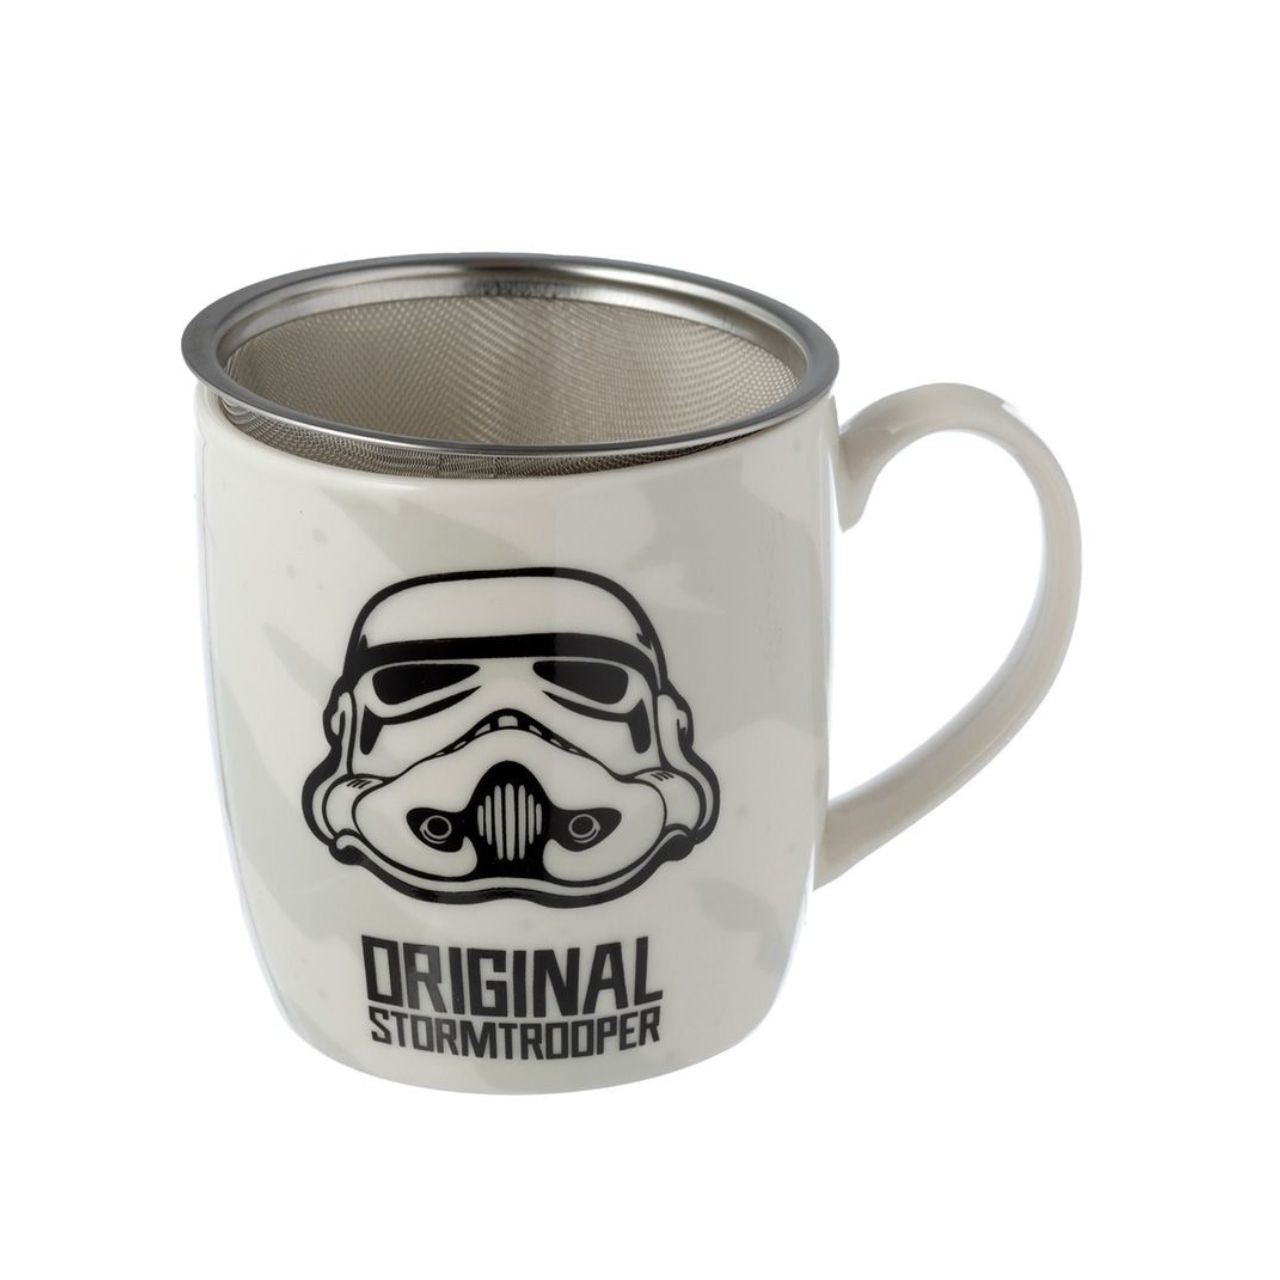 The Original Stormtrooper Infuser Mug Set with Lid  Experience the ultimate in hot beverage enjoyment with this high-quality Stormtrooper Infuser Mug Set. The set comes with a mug and lid, both decorated with intricate details of the iconic Stormtrooper. Each mug is crafted from high-grade porcelain, offering superior heat retention for a longer lasting drink. Enjoy your favourite hot beverage in true fan style.